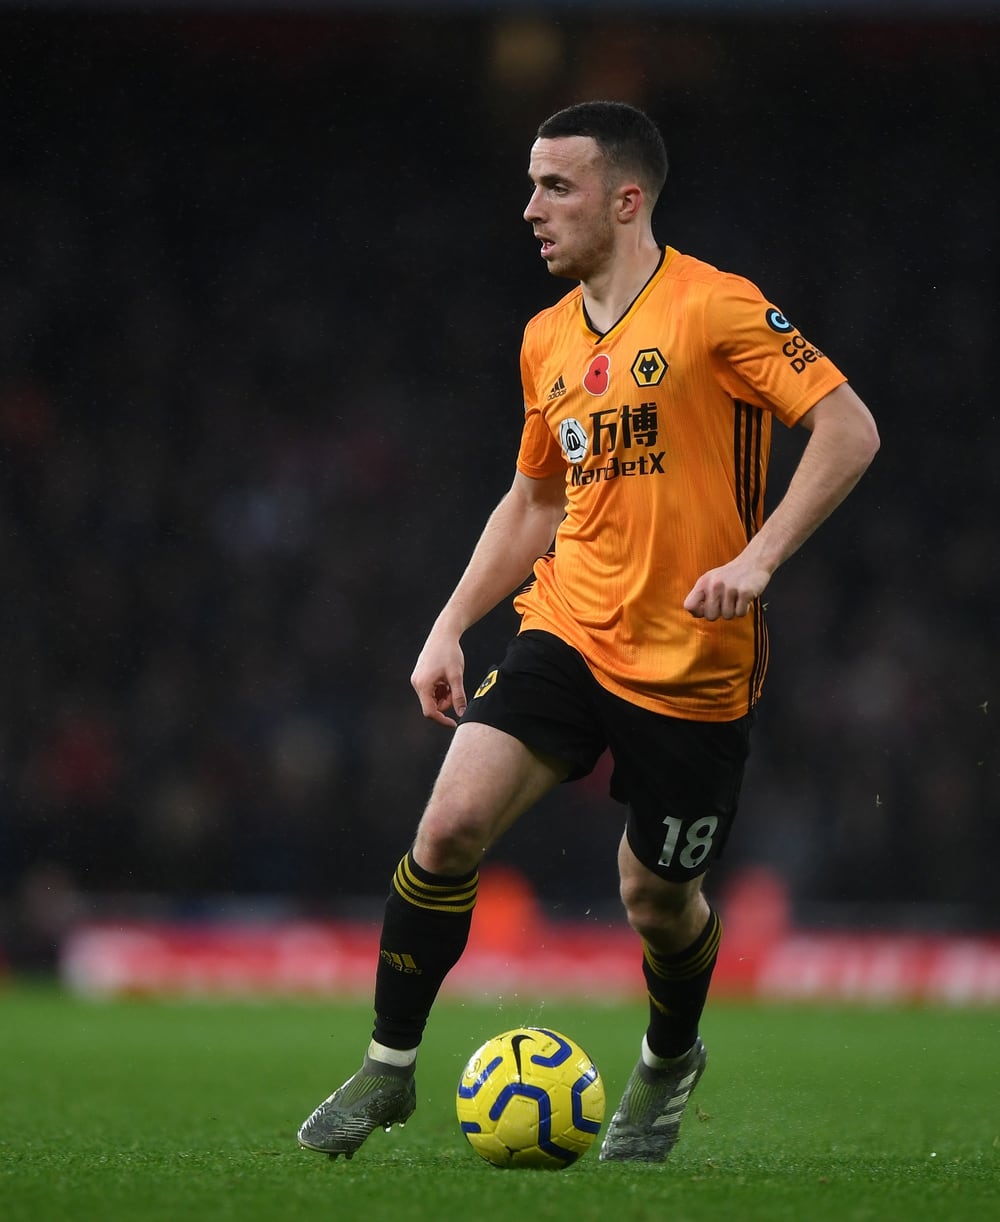 Nuno: Diogo Jota getting back to his best for Wolves. 